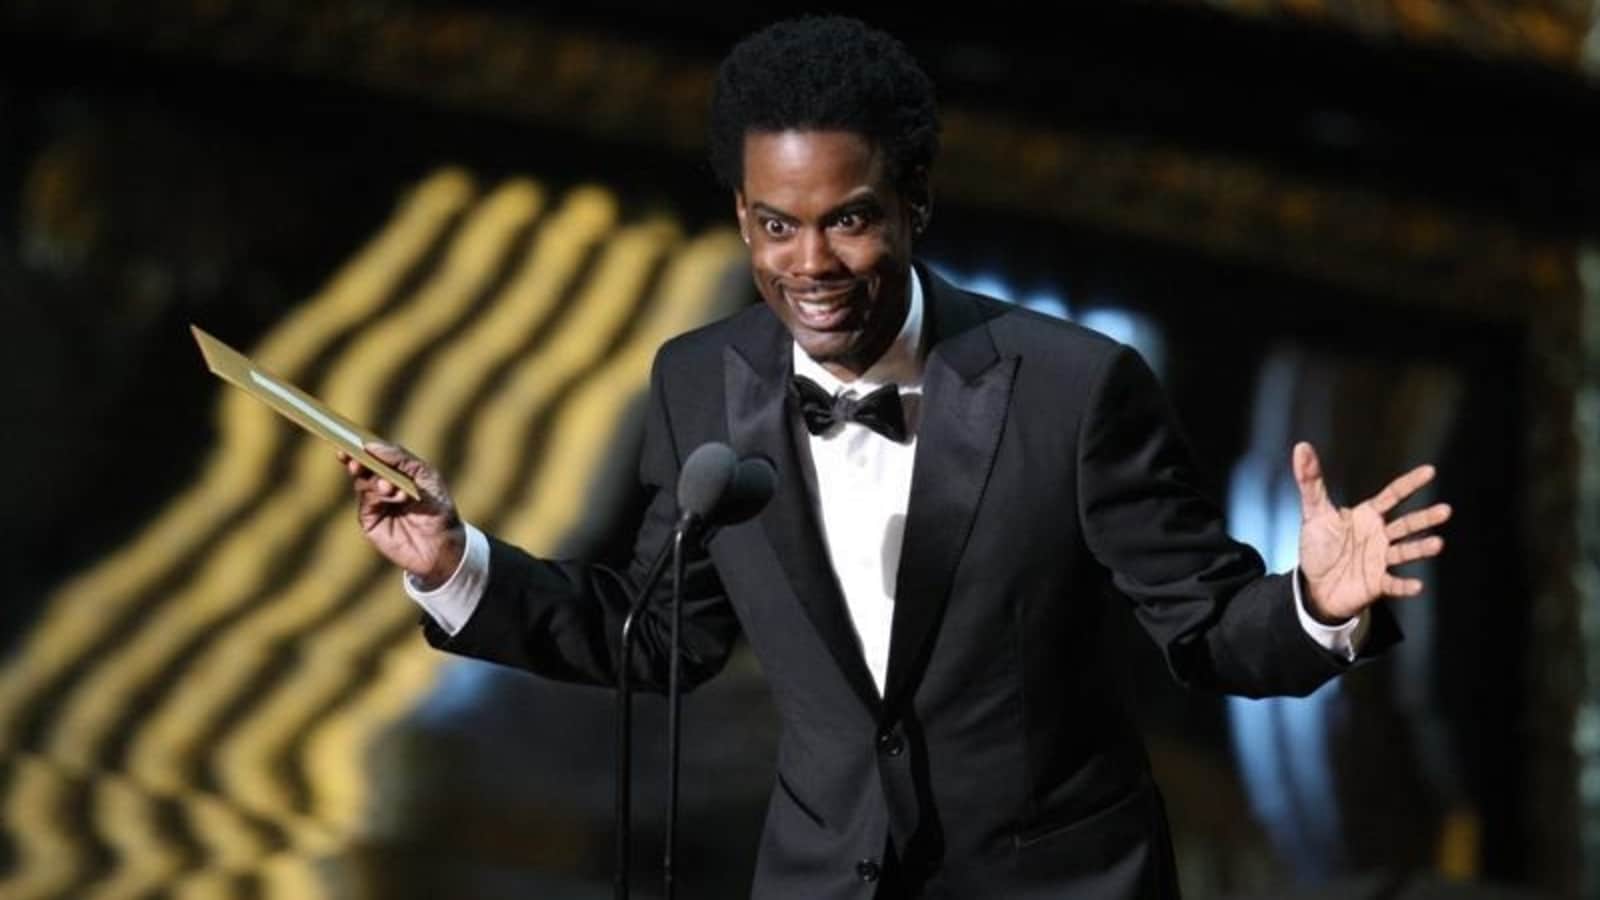 Chris Rock declines offer to host Oscars 2023 ceremony, reveals during standup show